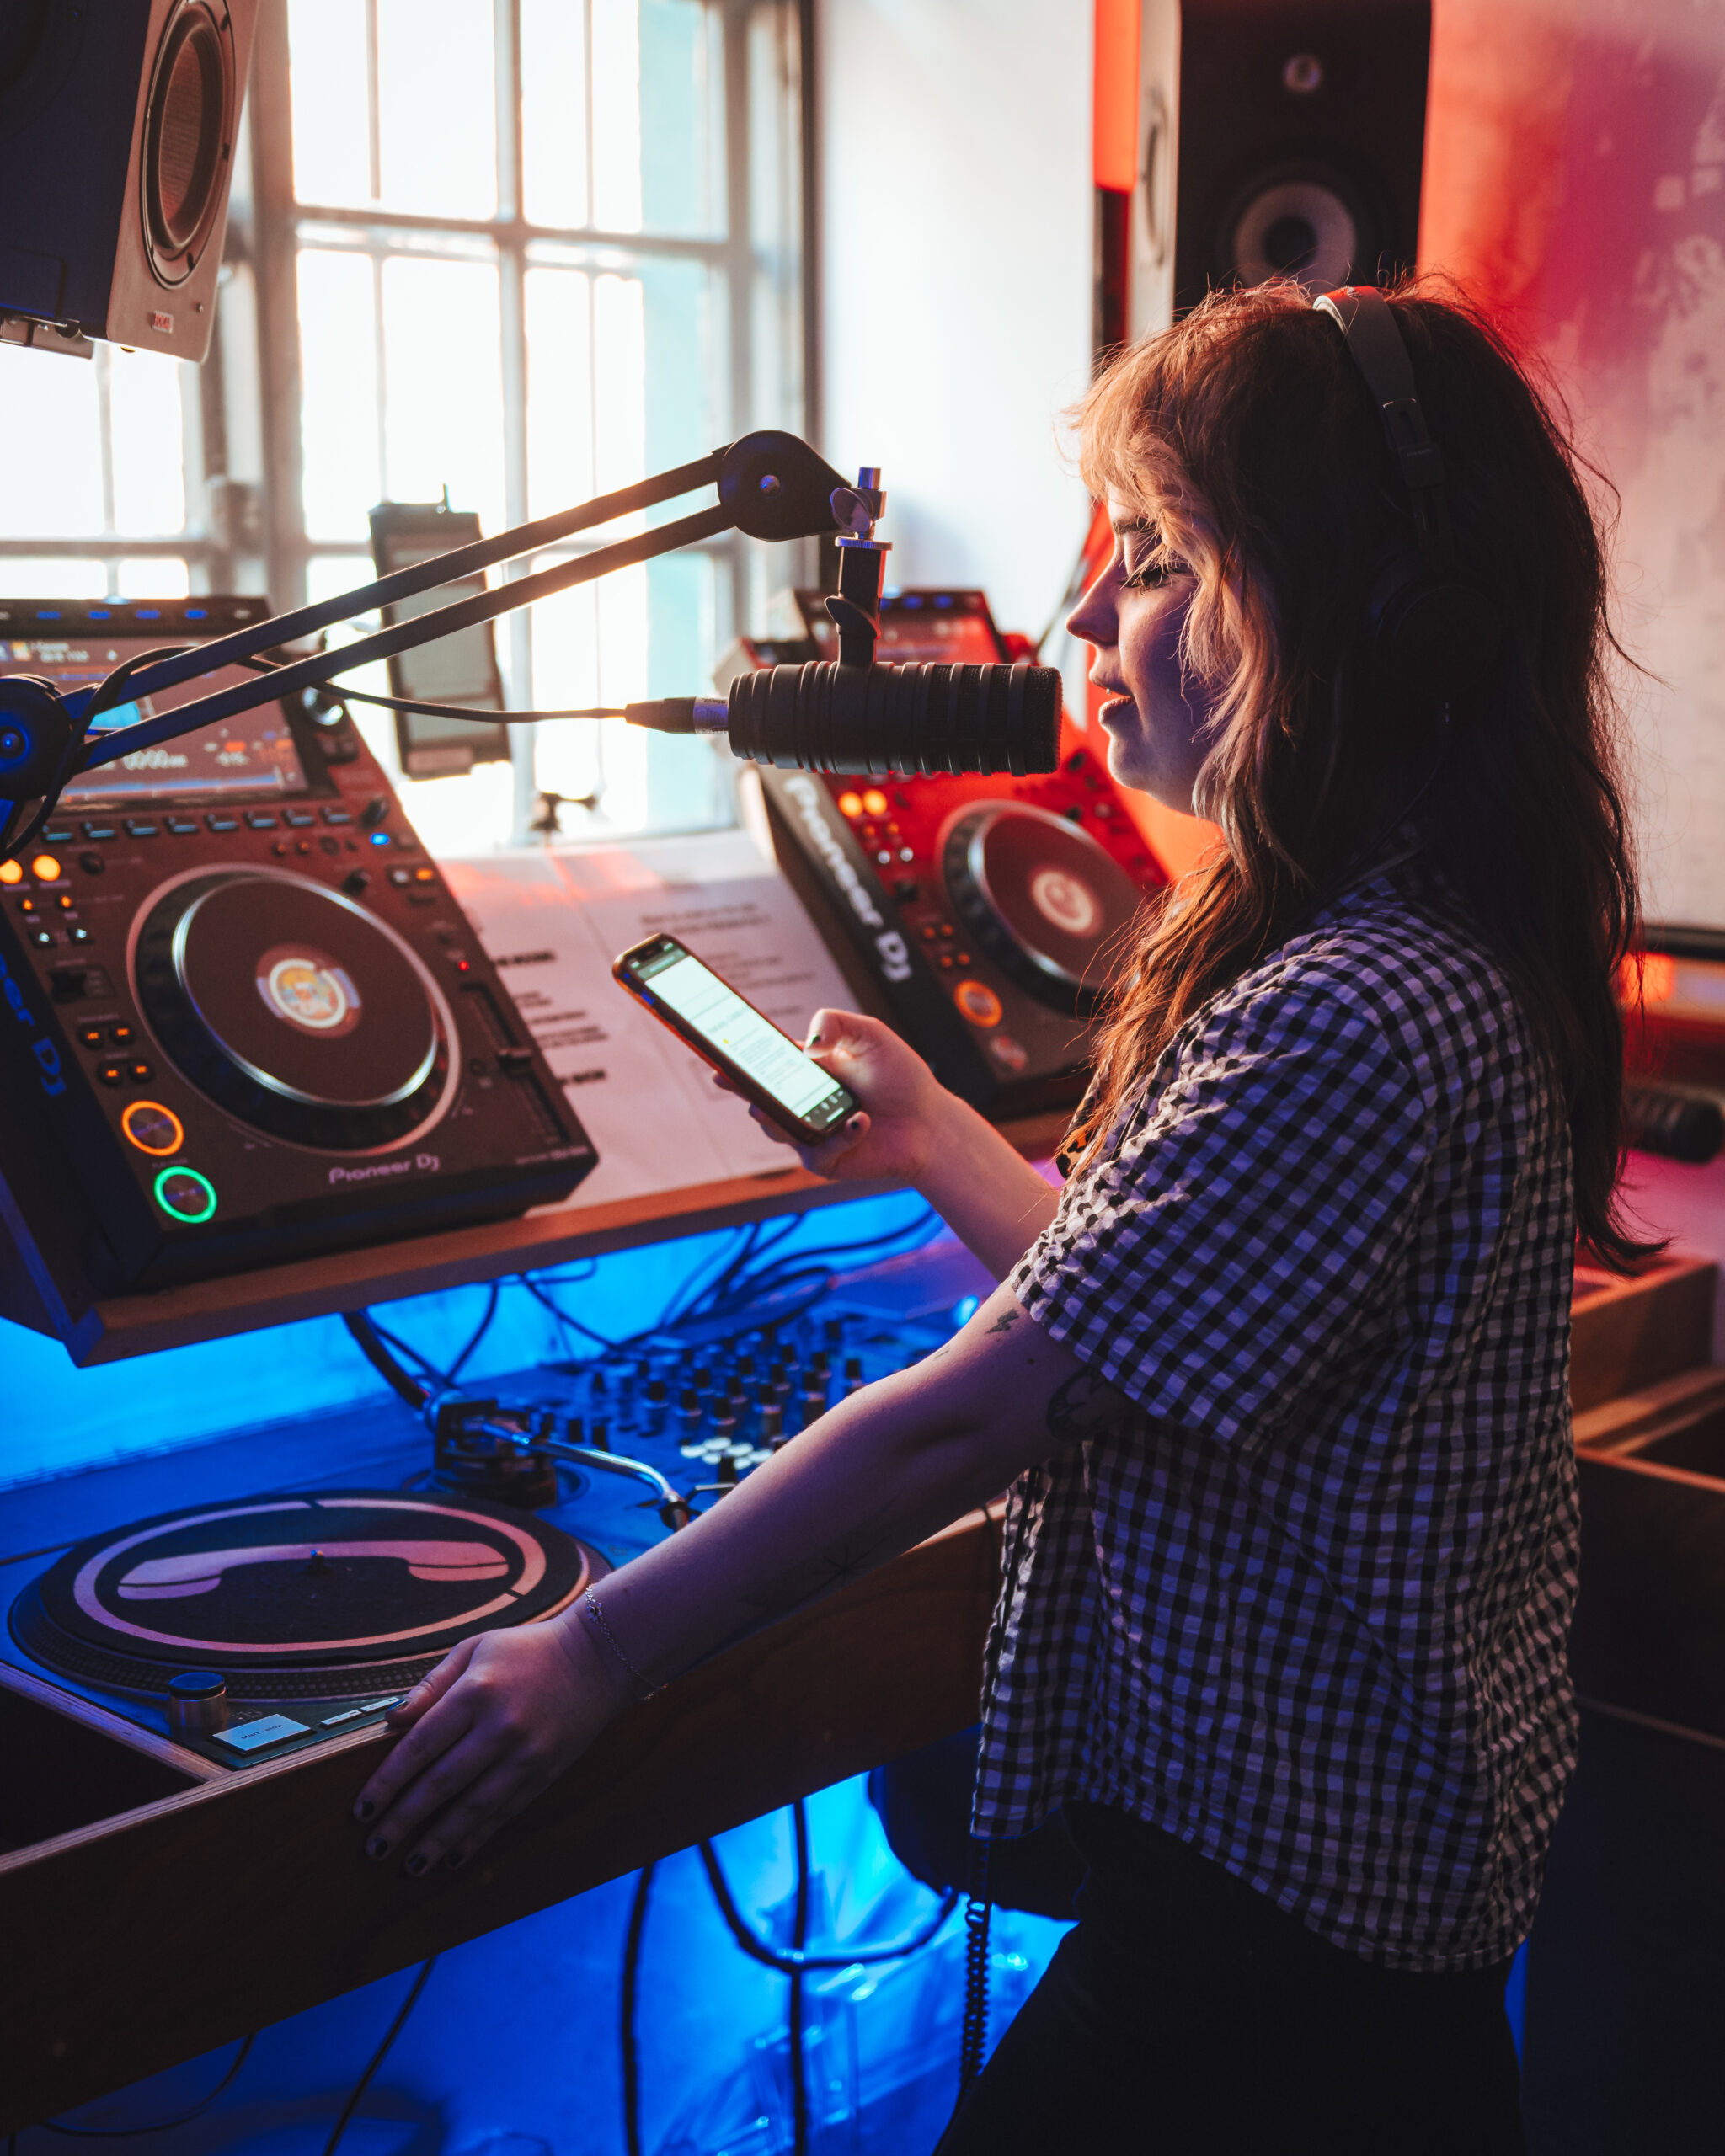 An image of a woman in front of DJ decks, speaking into a microphone.